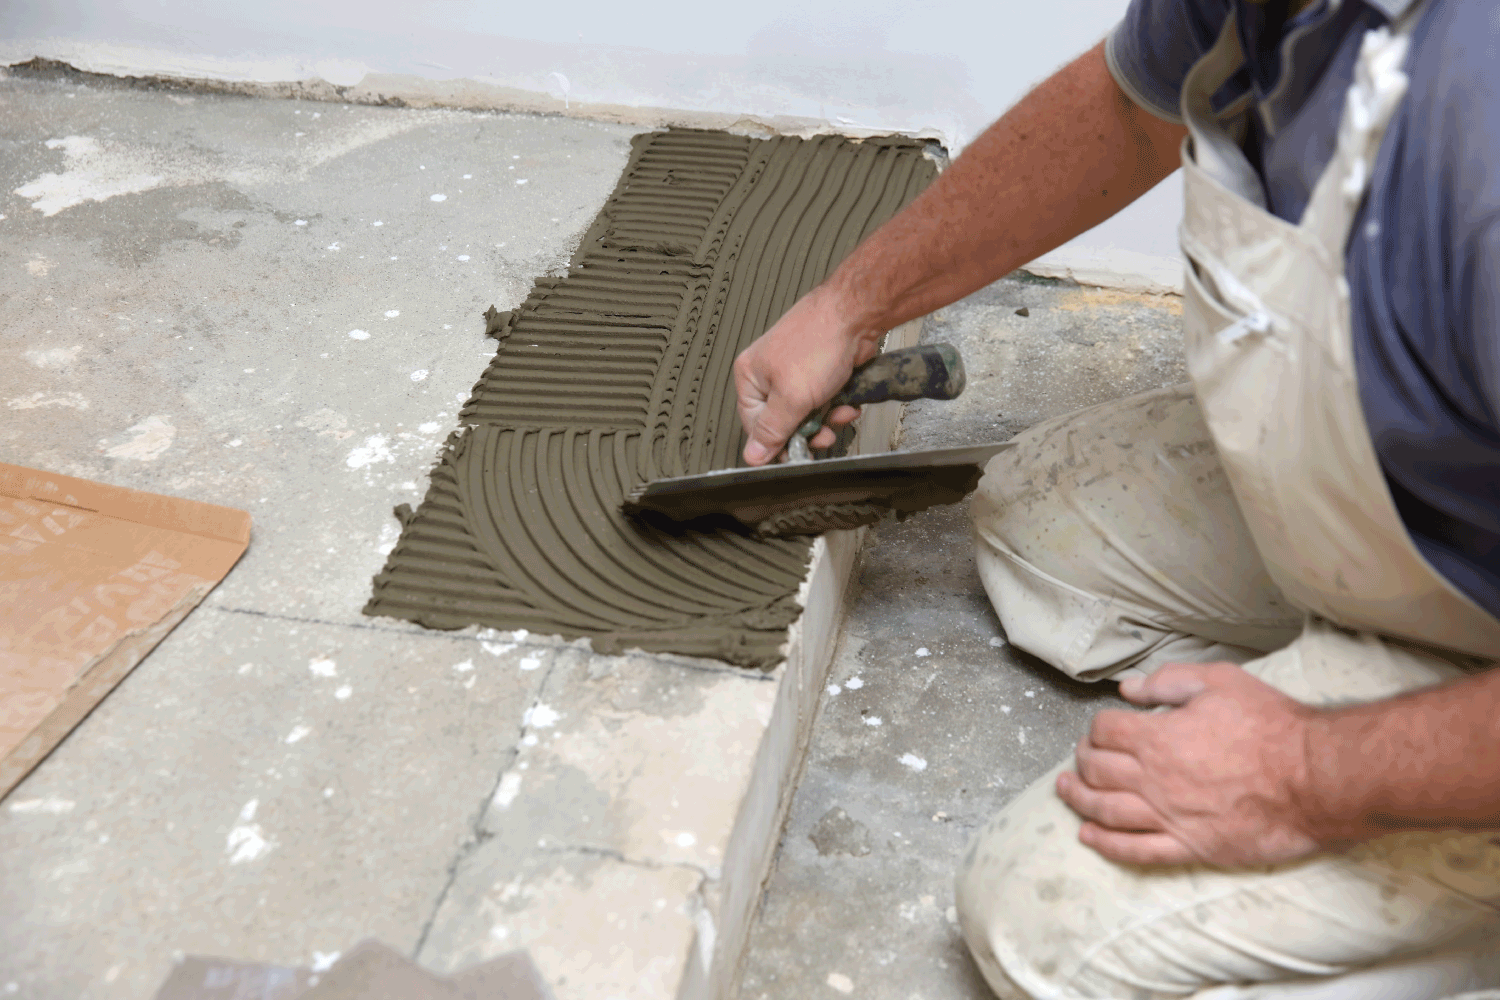 construction worker uses a cemented trowel to apply cement glue to the stairs